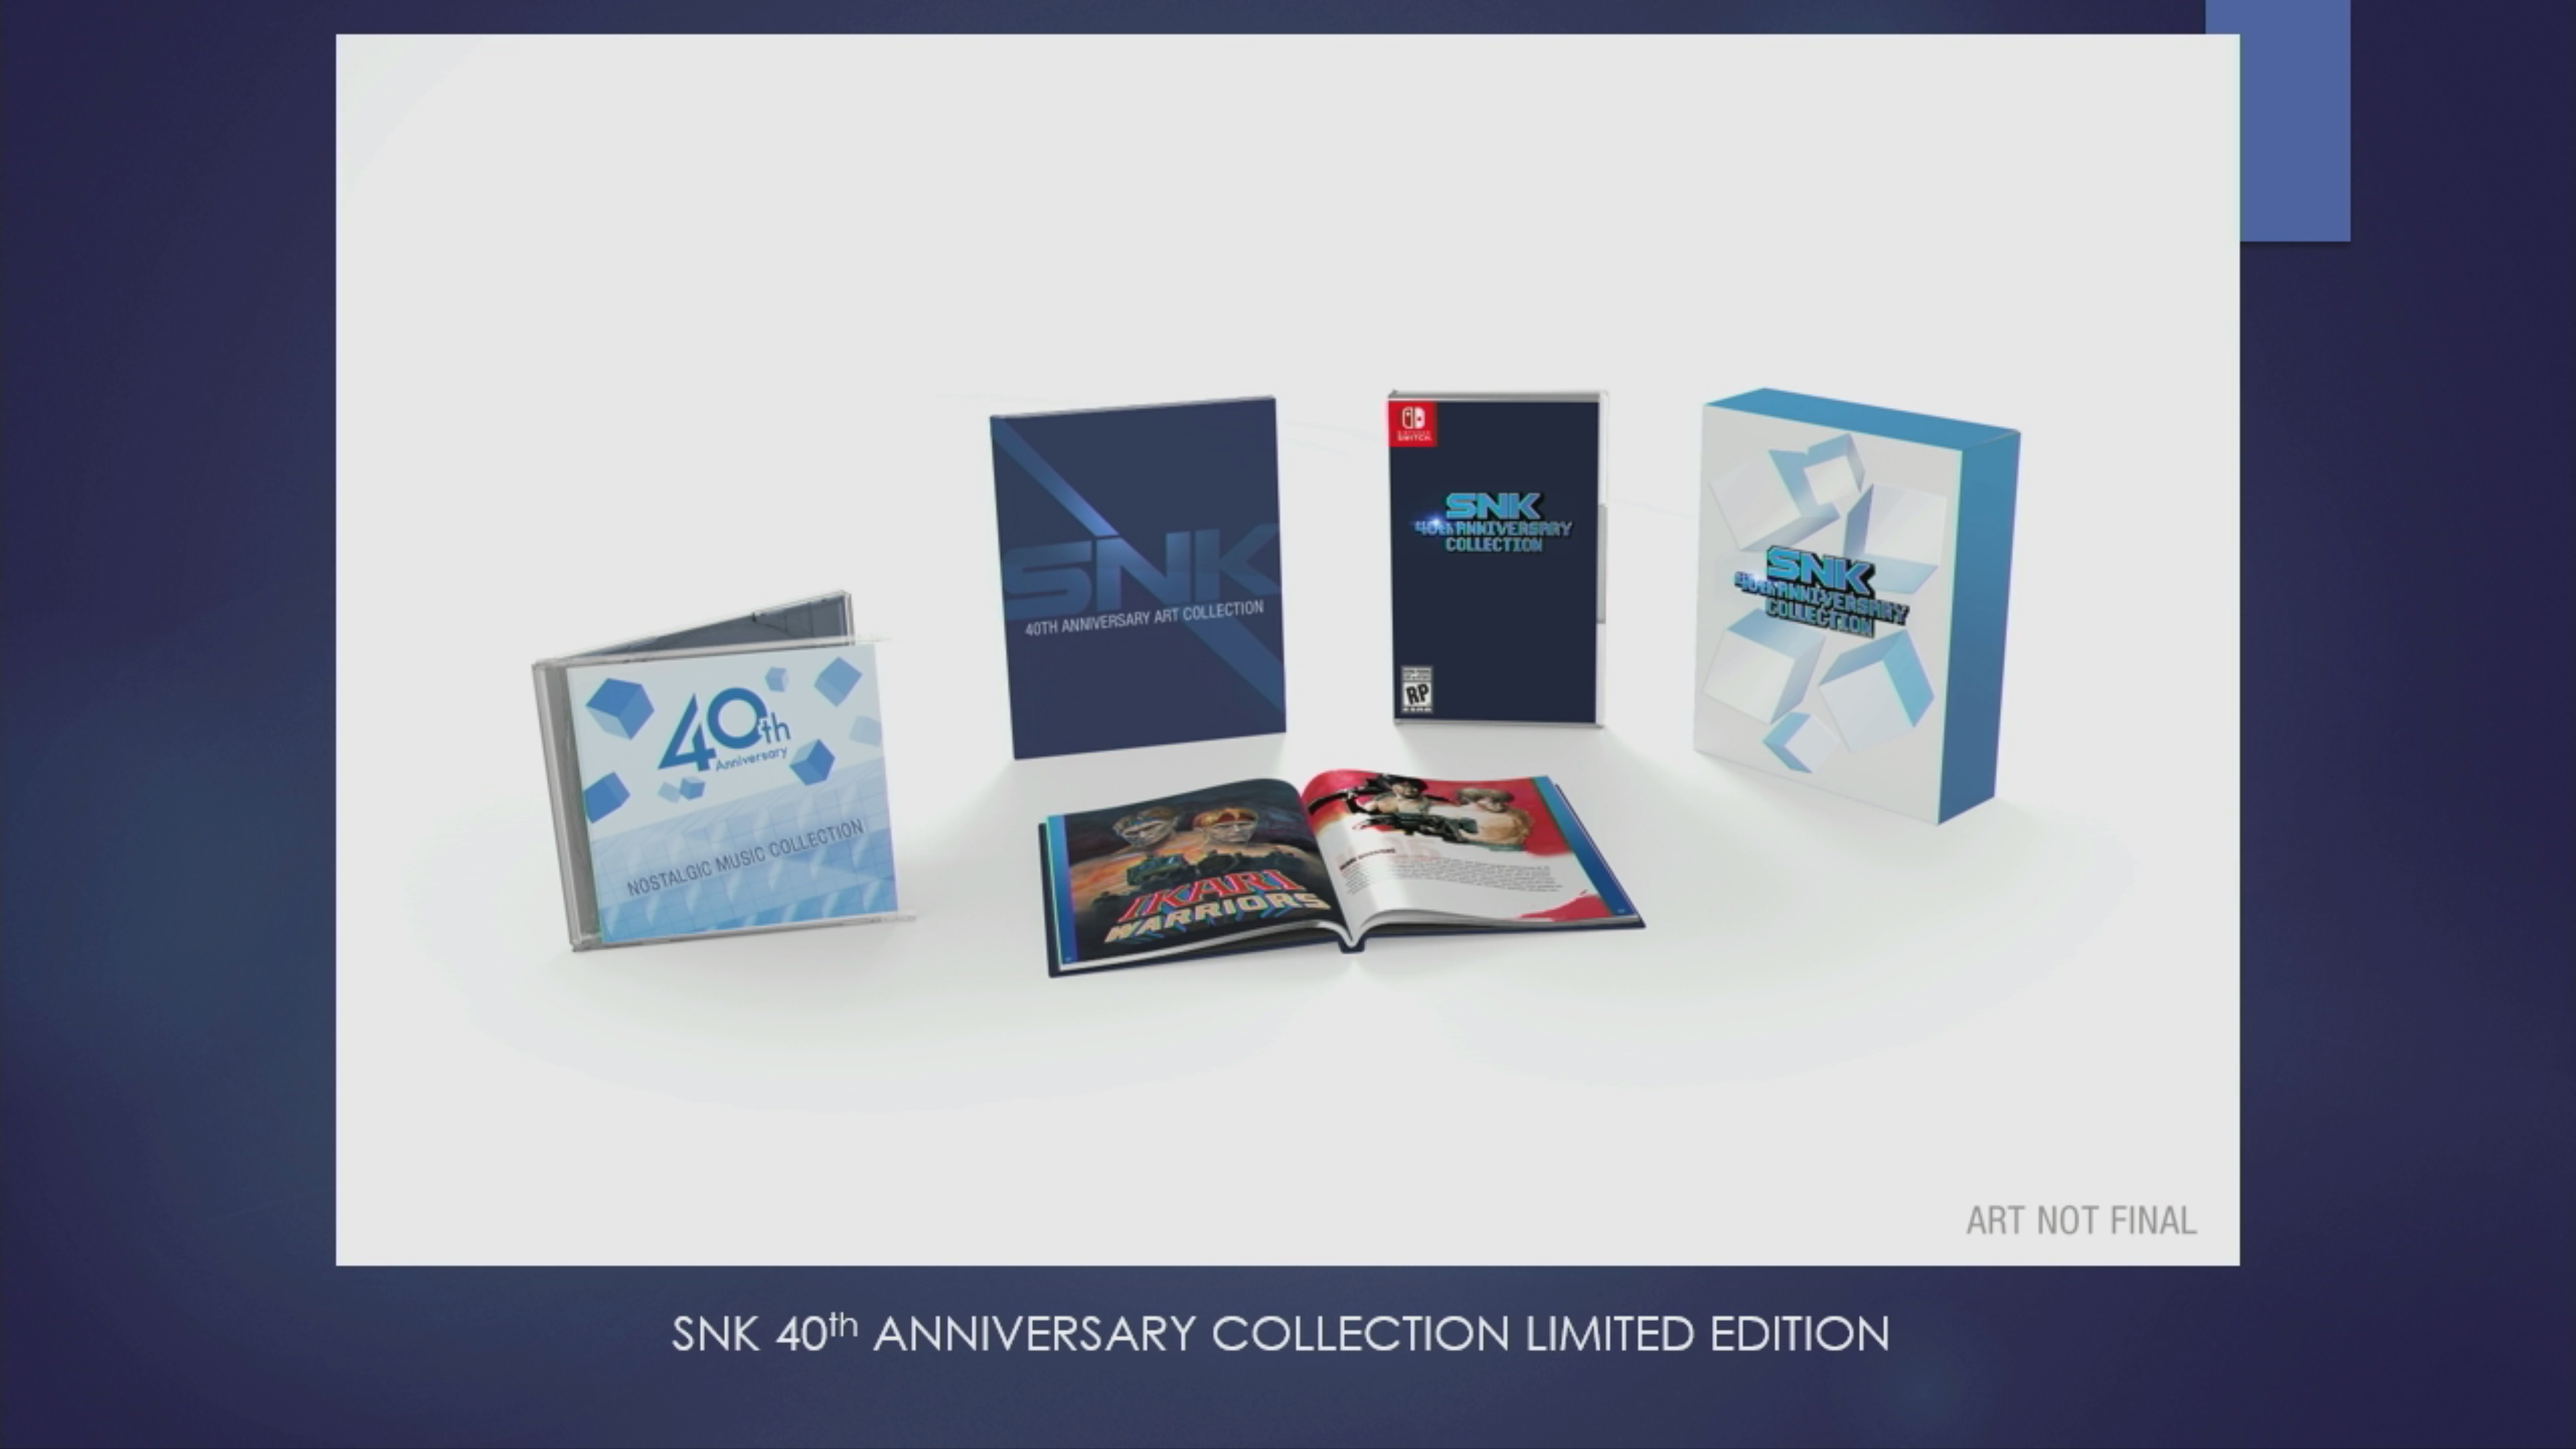 snk-40th-anniversary-collection-limited-edition.jpg